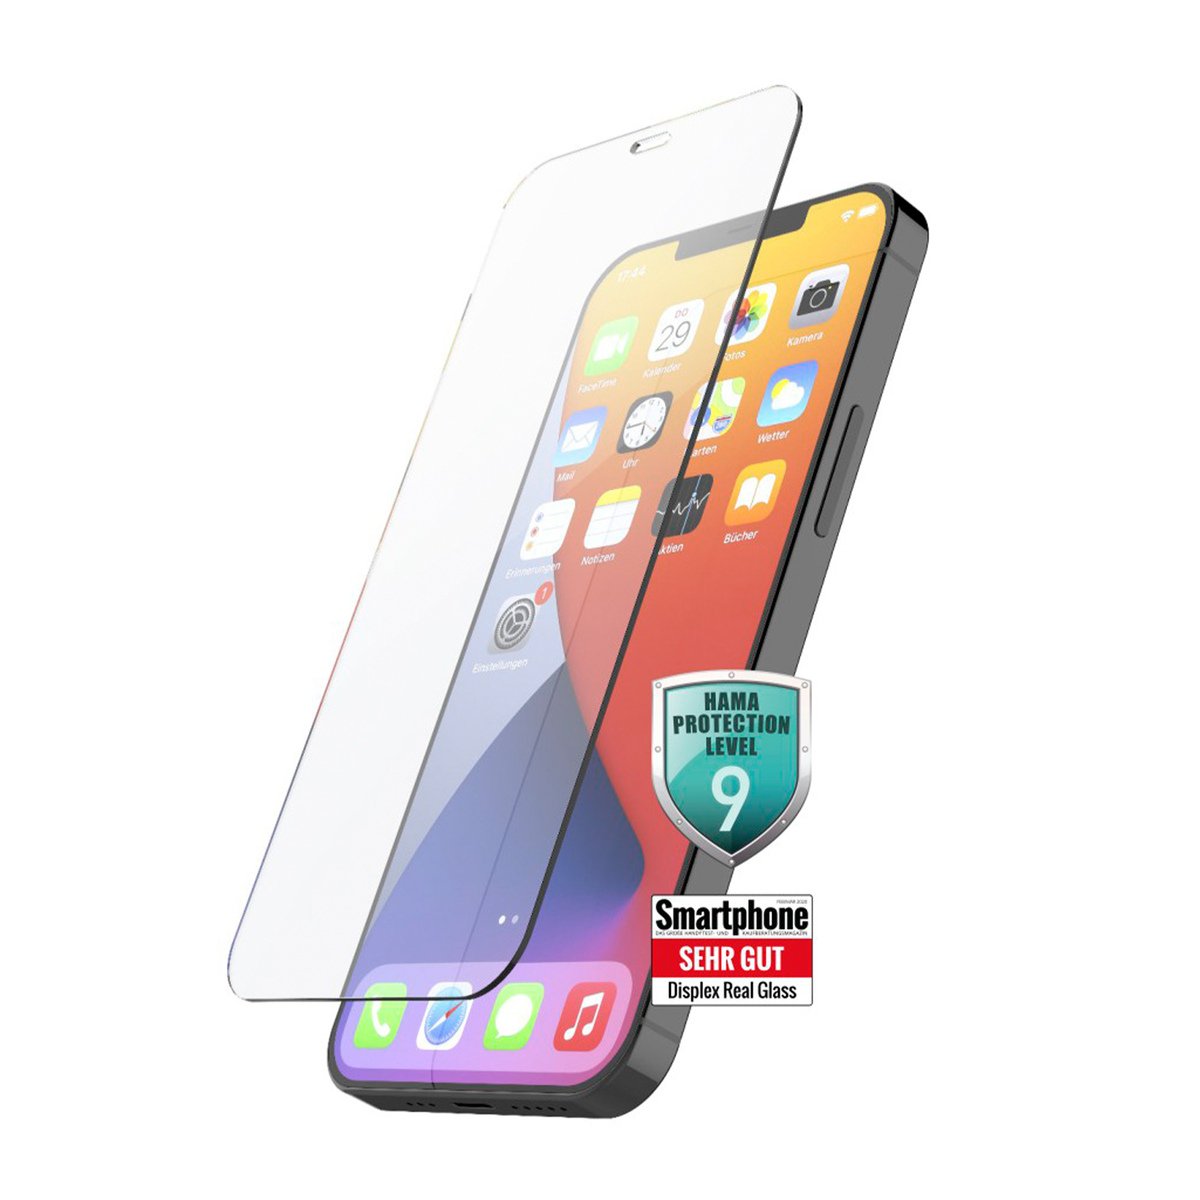 Hama Premium Crystal Glass Real Glass Screen Protector for iPhone 12 Pro Max (188672)